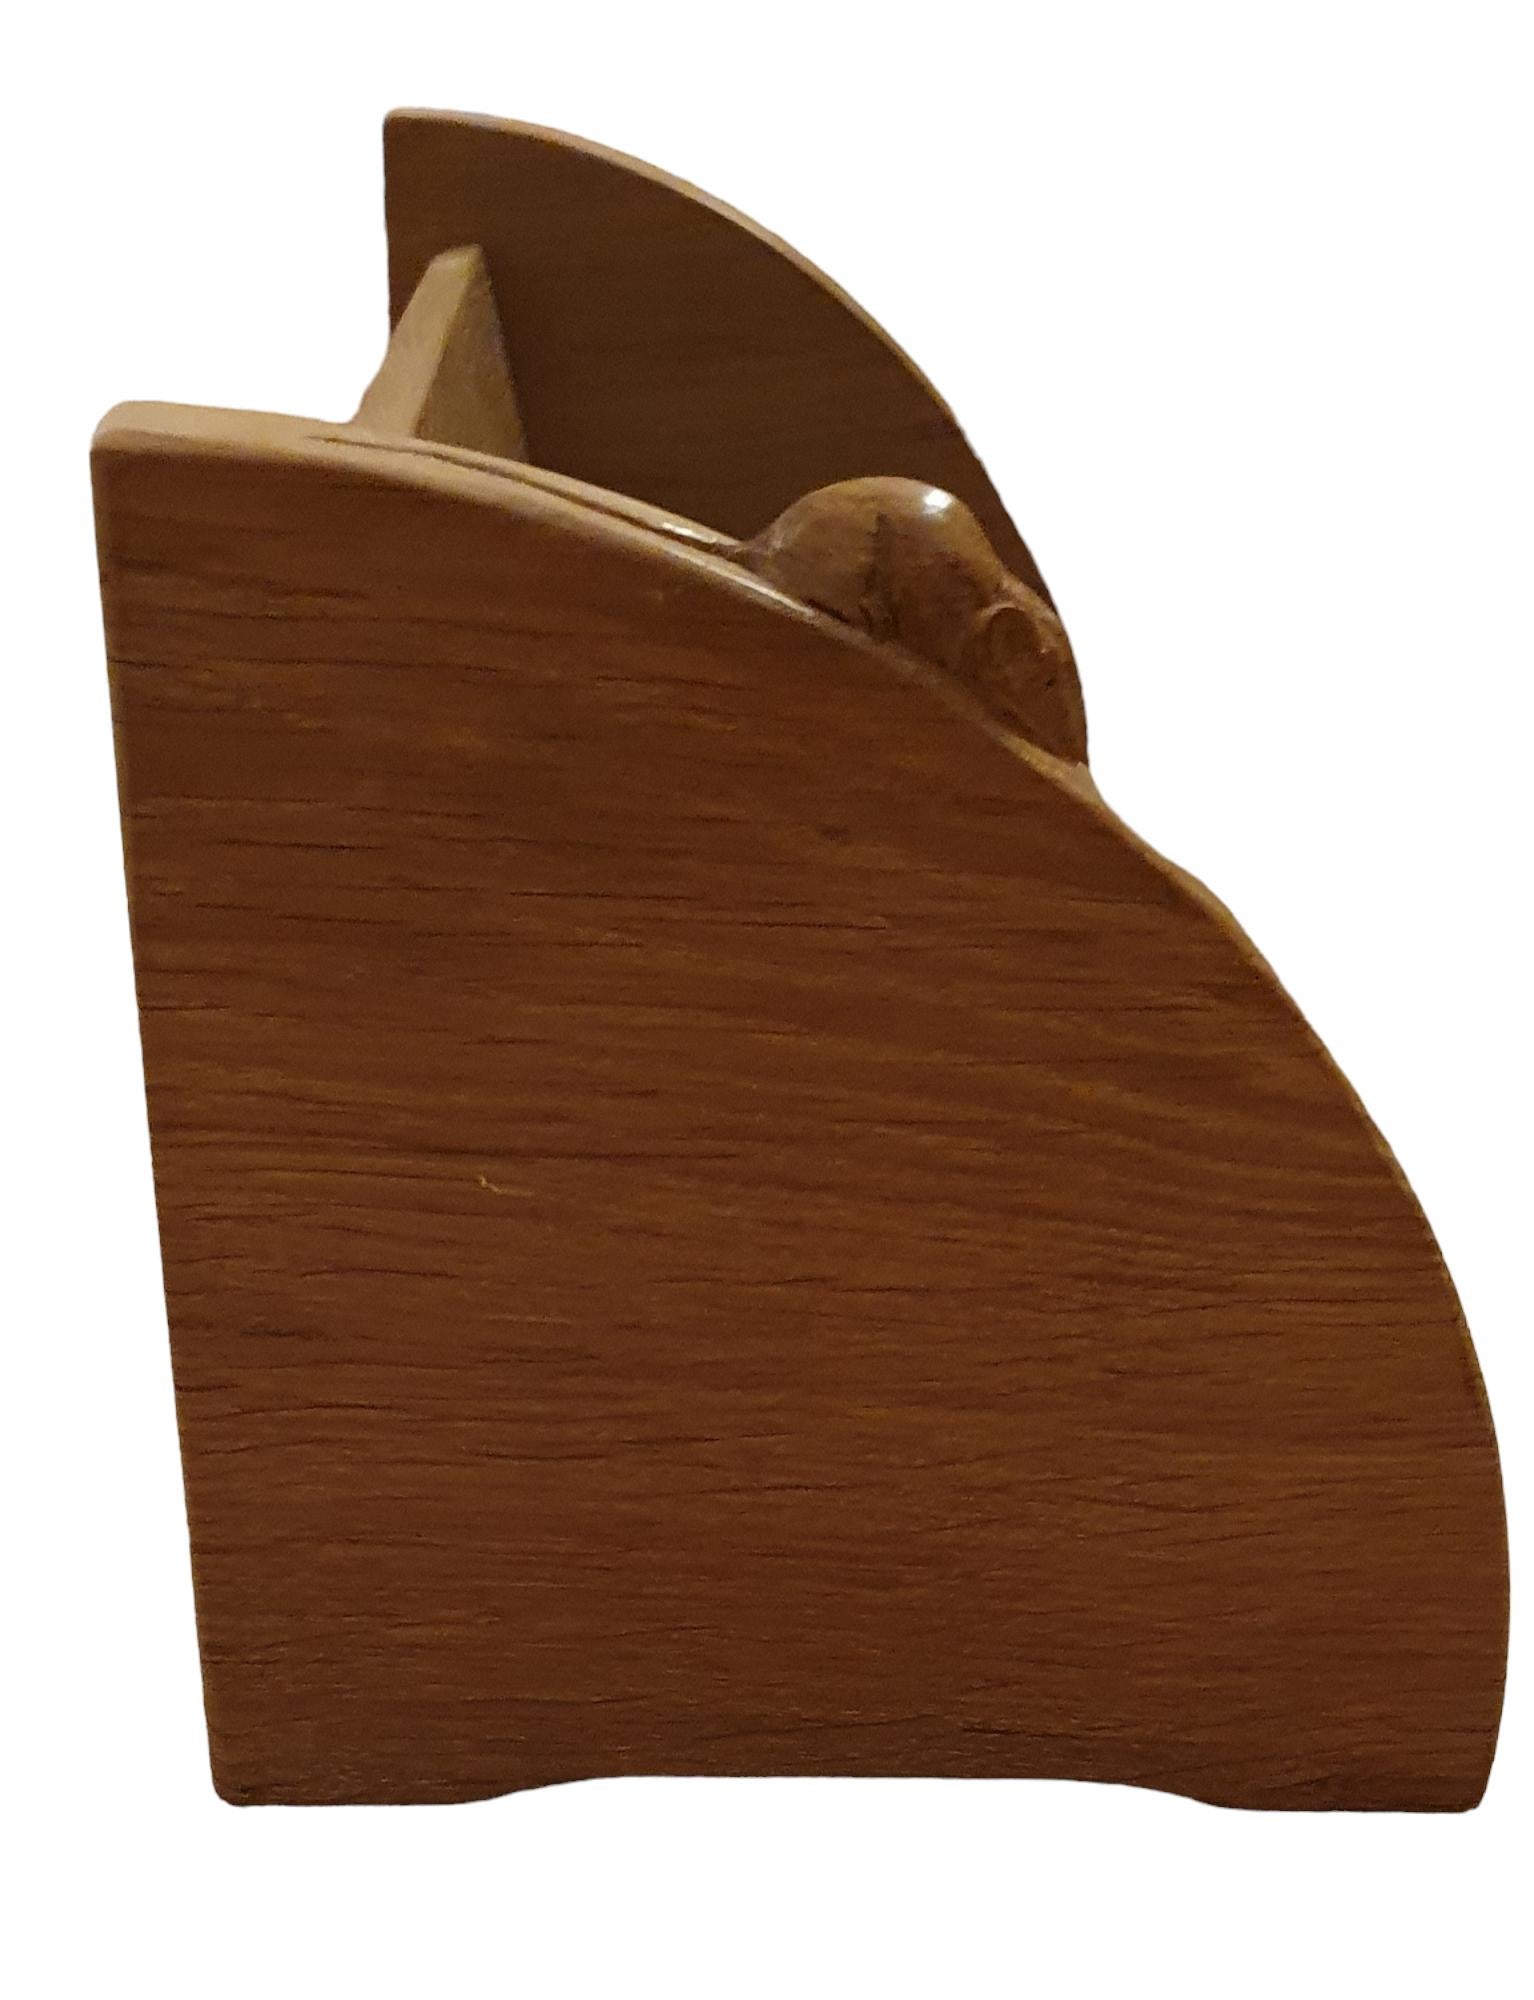 Stunning vintage oak book rack by Robert Thompson (also known as mouseman) from the 1960's. A simple and beautiful rack with the characteristic carved mouse signature. 

Robert 